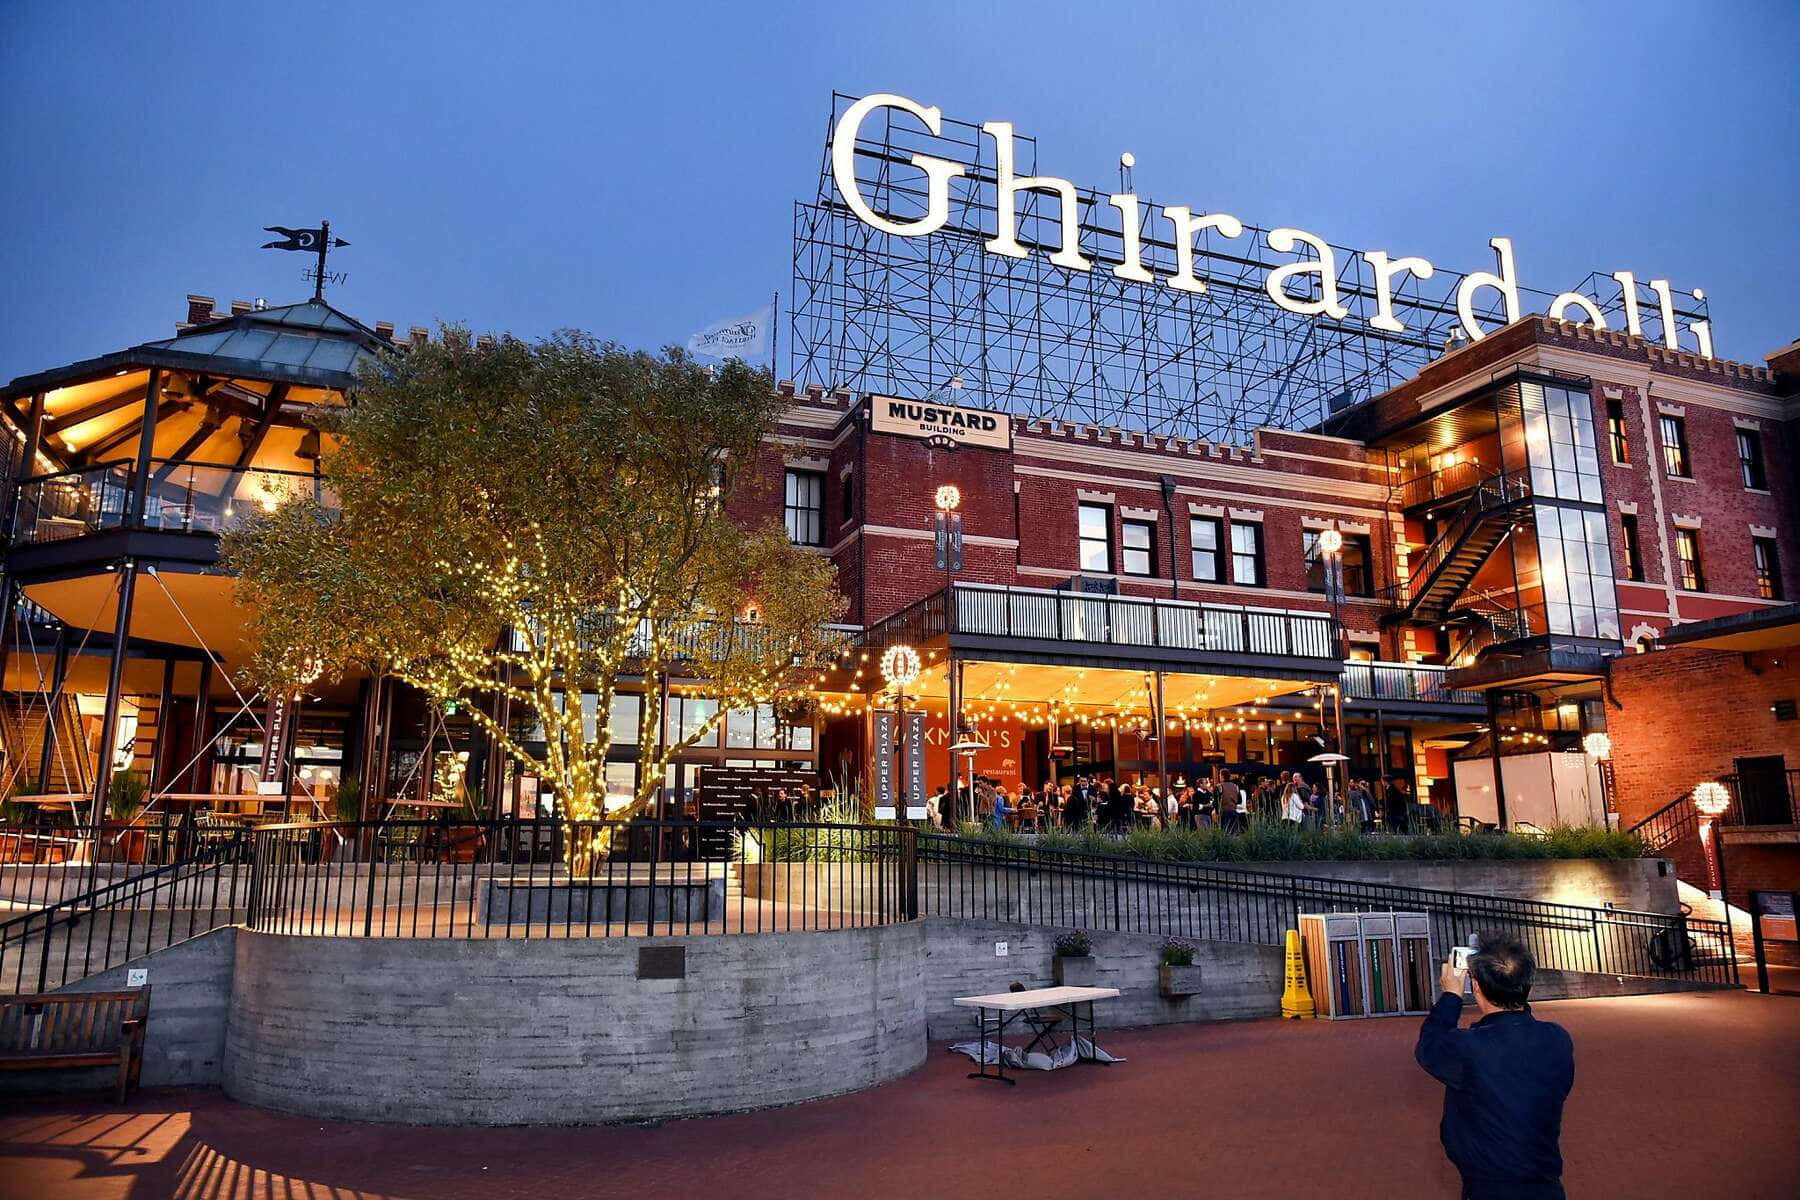 "Iconic Ghirardelli Square Under Blue Afternoon Sky" Wallpaper